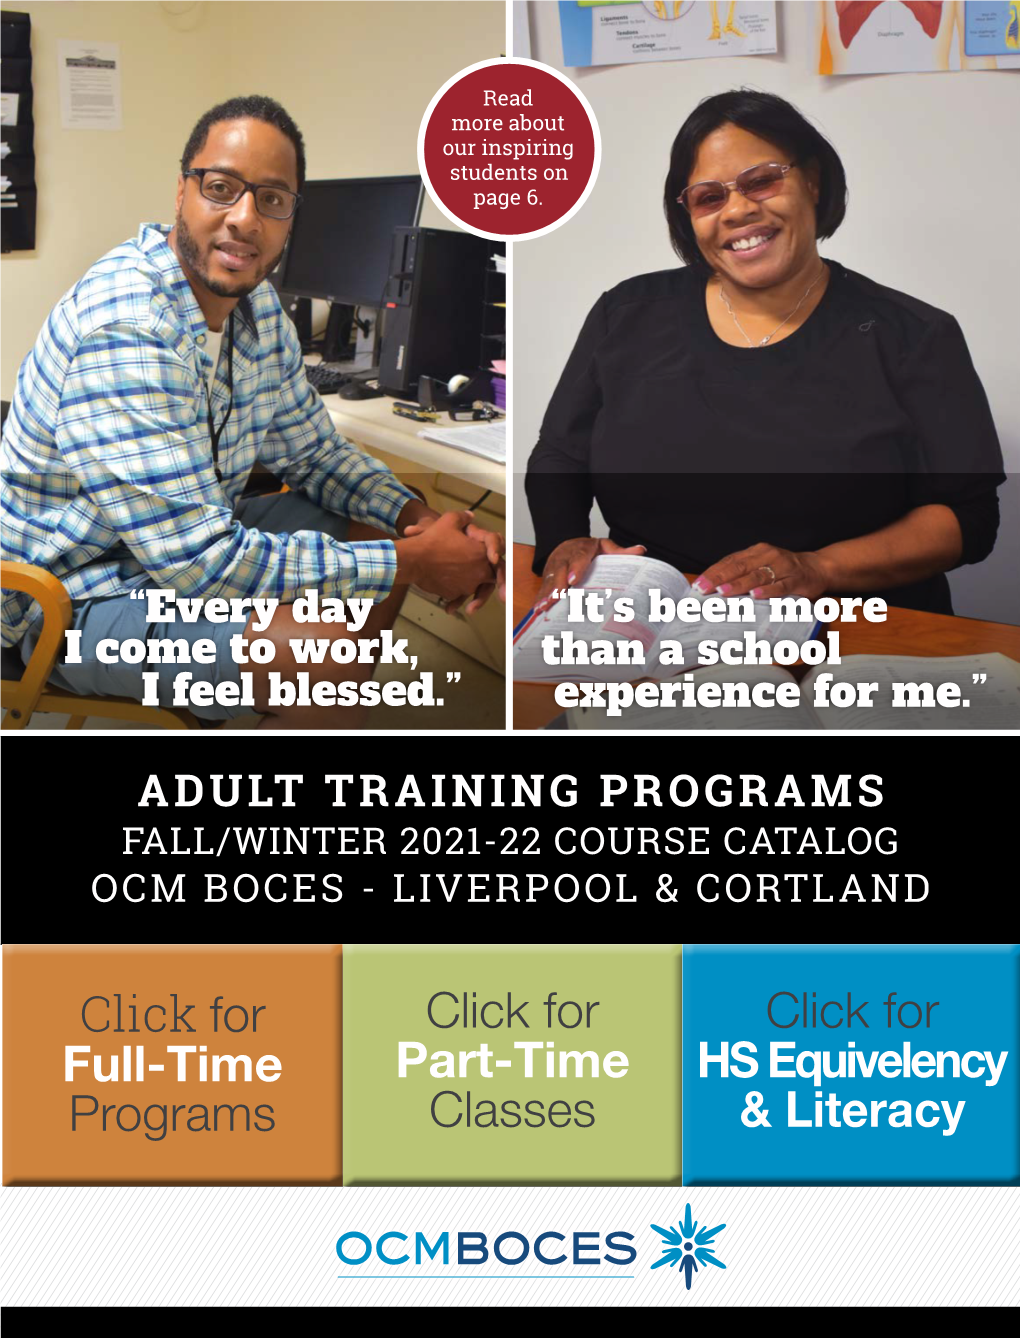 Full-Time Programs Click for Part-Time Classes